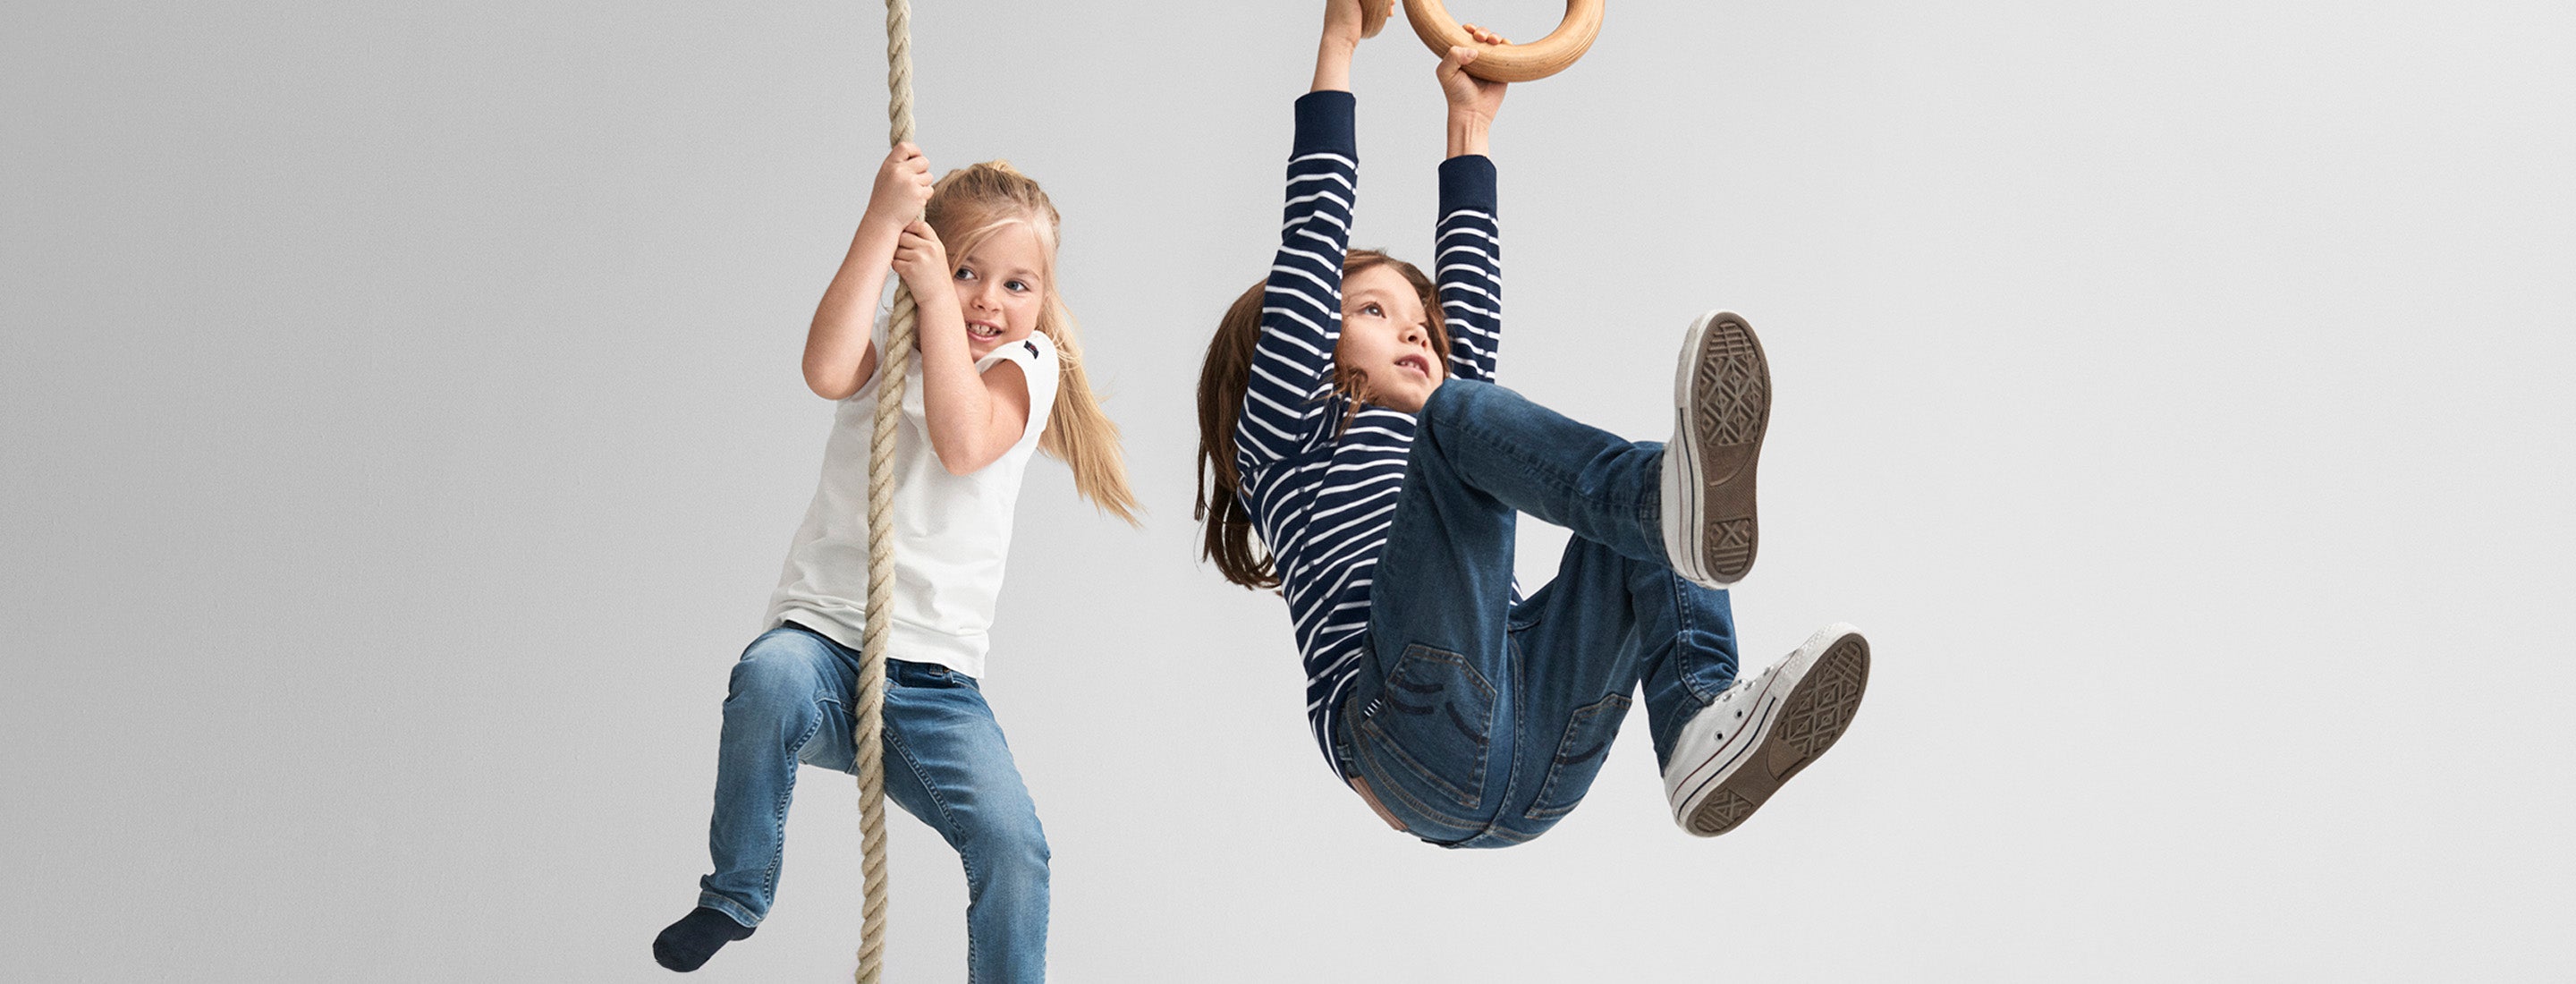 One child climbing a rope wearing a white Polarn O. Pyret shirt and Polarn O. Pyret jeans and one child climbing a gymnastic ring wearing a striped Polarn O. Pyret shirt and Polarn O. Pyret jeans 